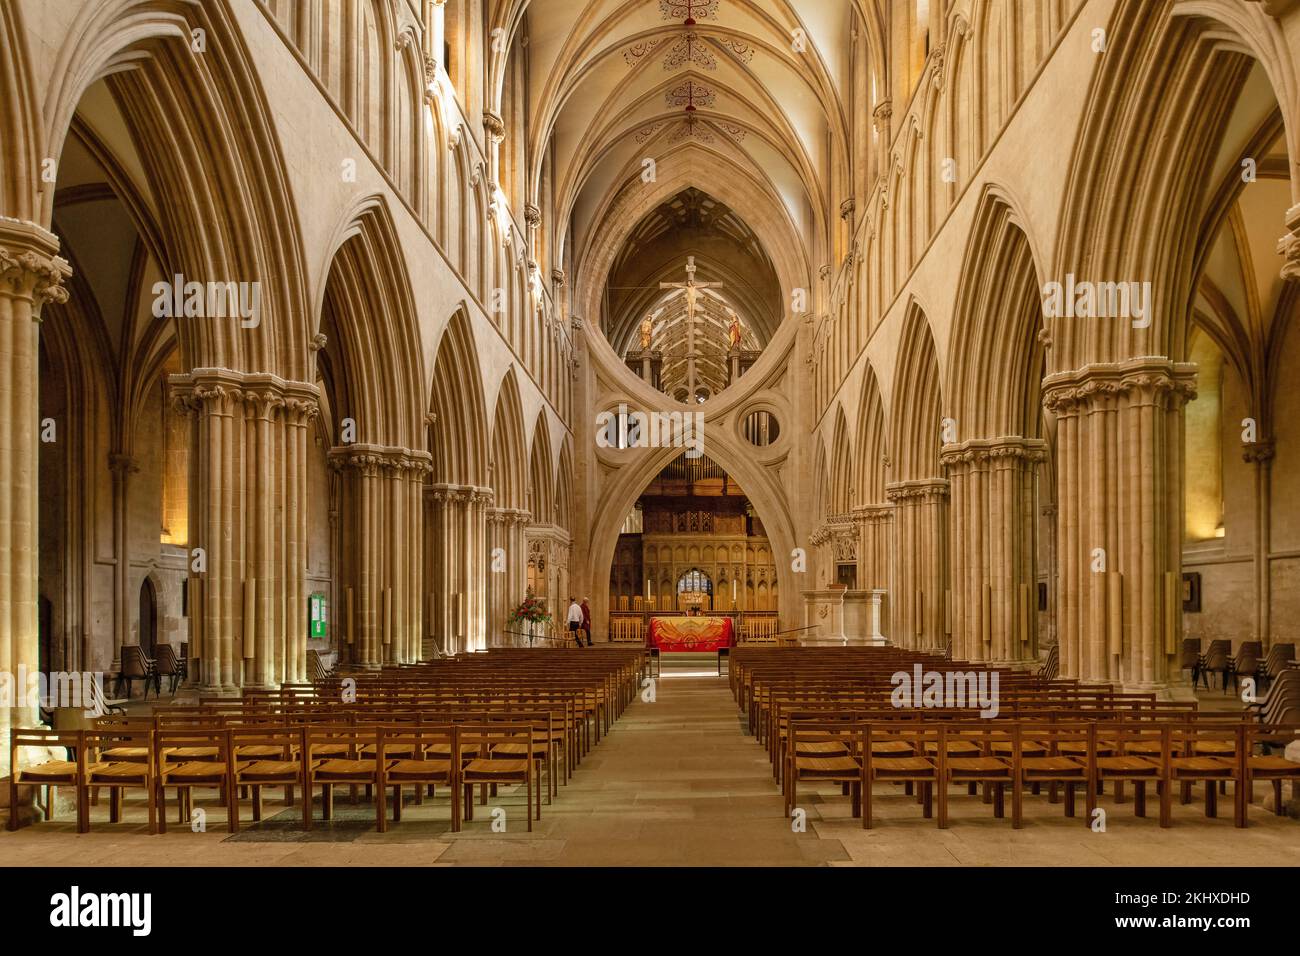 Interior view of wells cathedral. Stock Photo